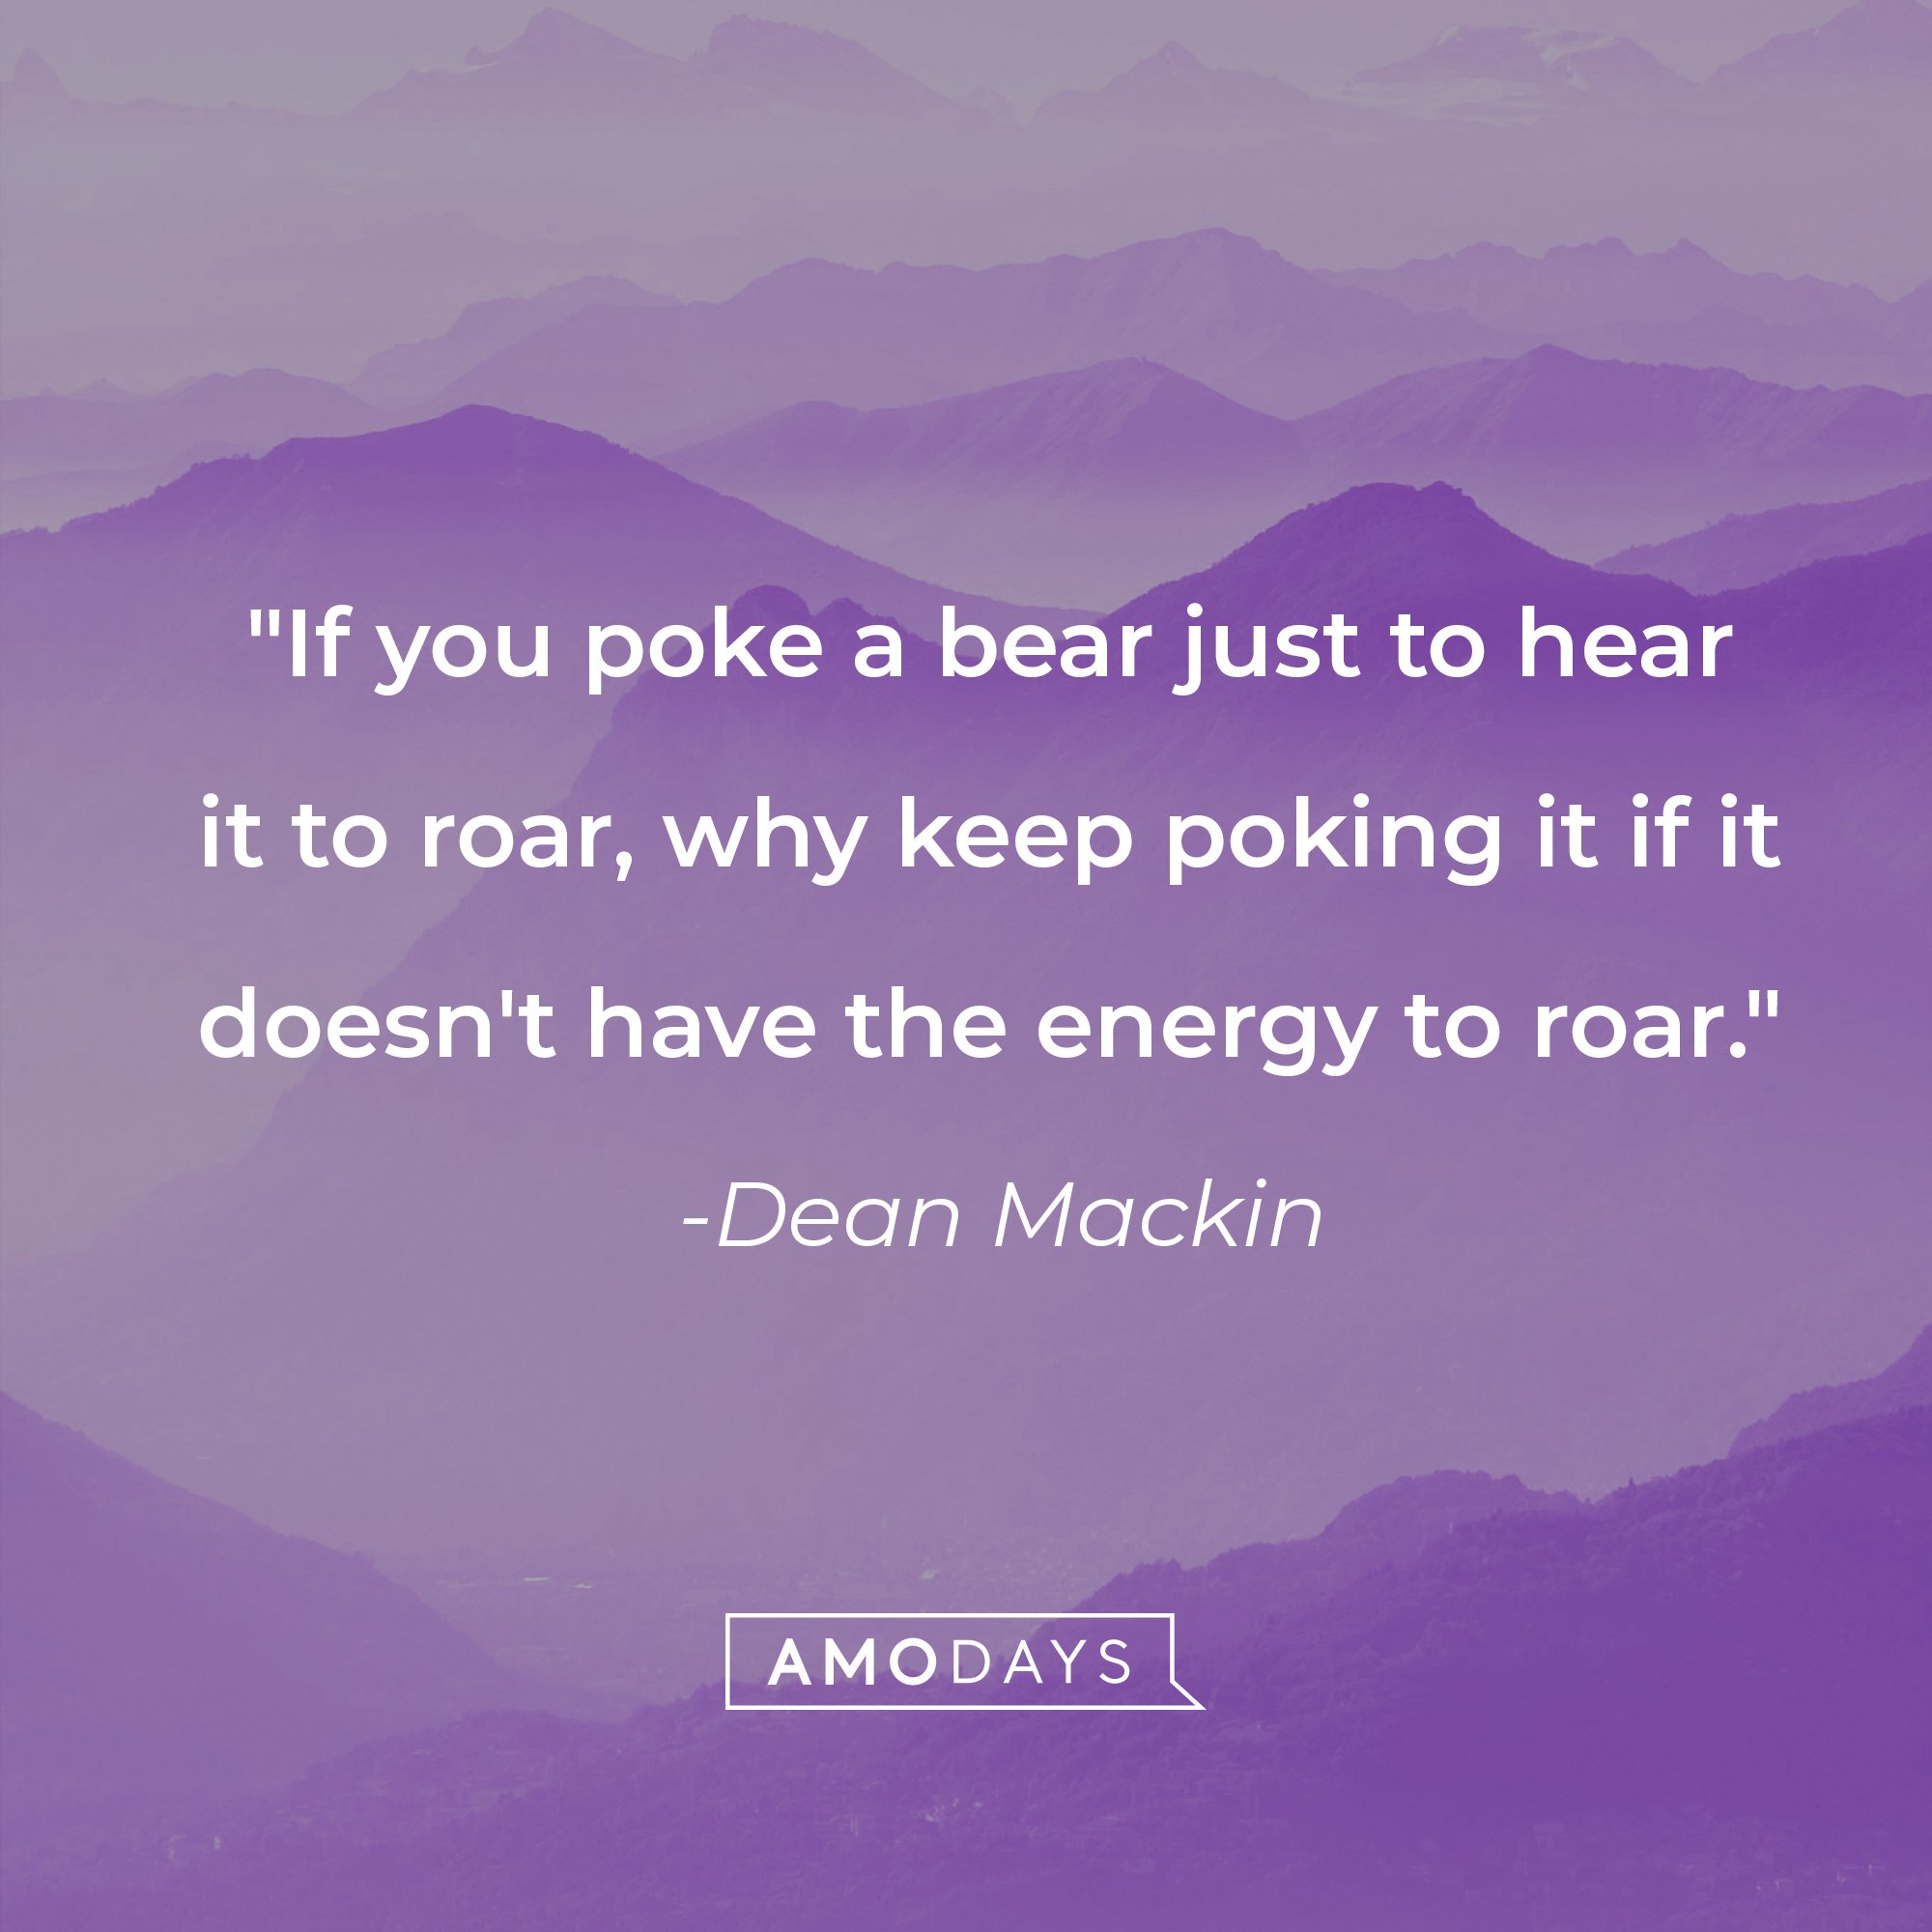 Dean Mackin's quote: "If you poke a bear just to hear it to roar, why keep poking it if it doesn't have the energy to roar." | Source: AmoDays